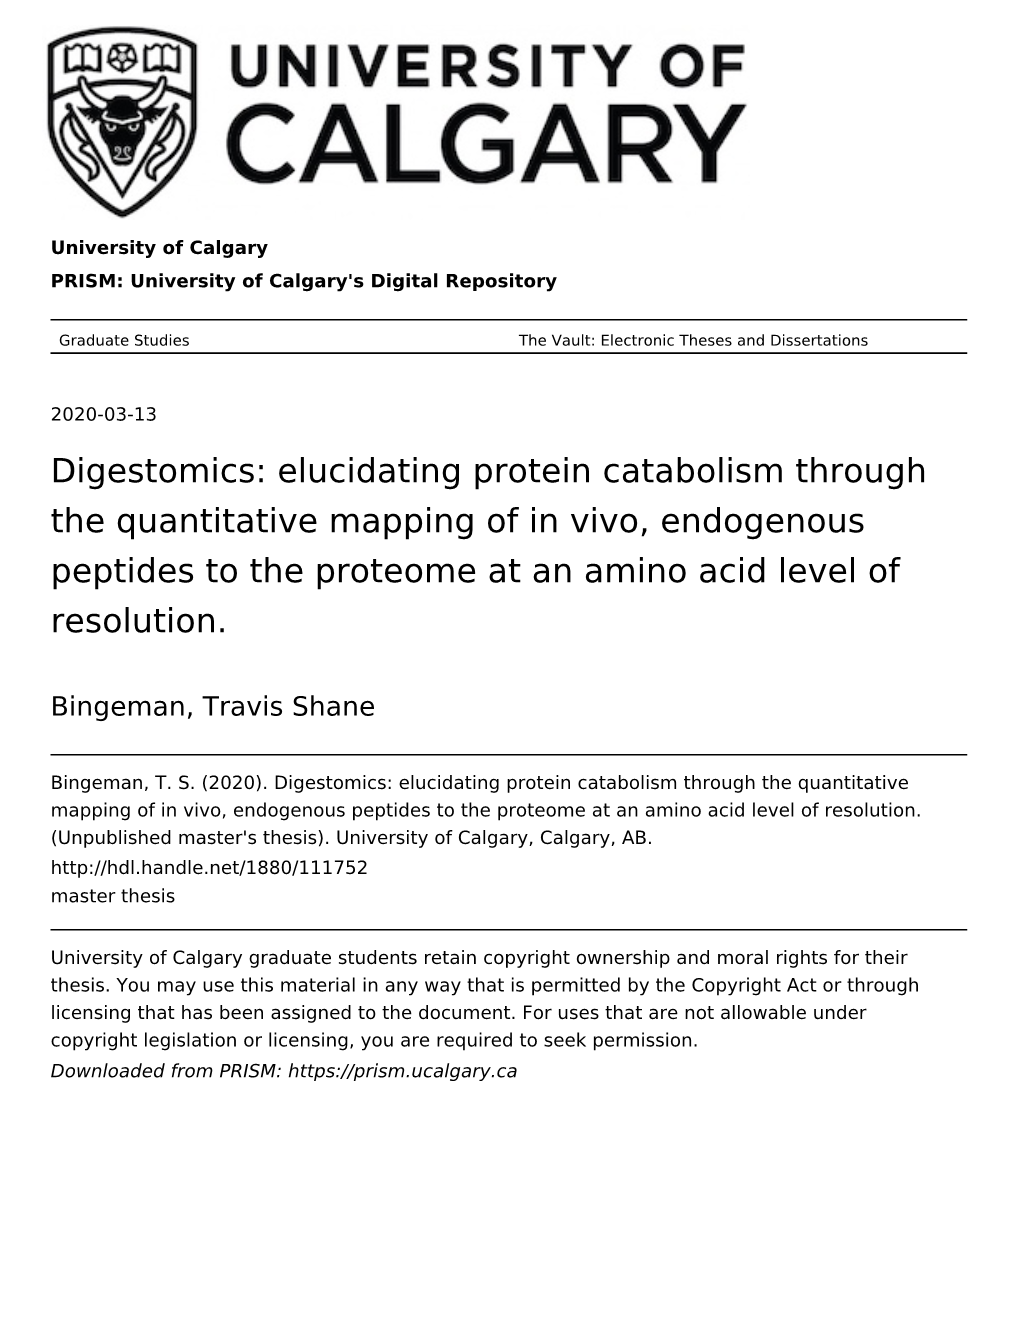 Digestomics: Elucidating Protein Catabolism Through the Quantitative Mapping of in Vivo, Endogenous Peptides to the Proteome at an Amino Acid Level of Resolution